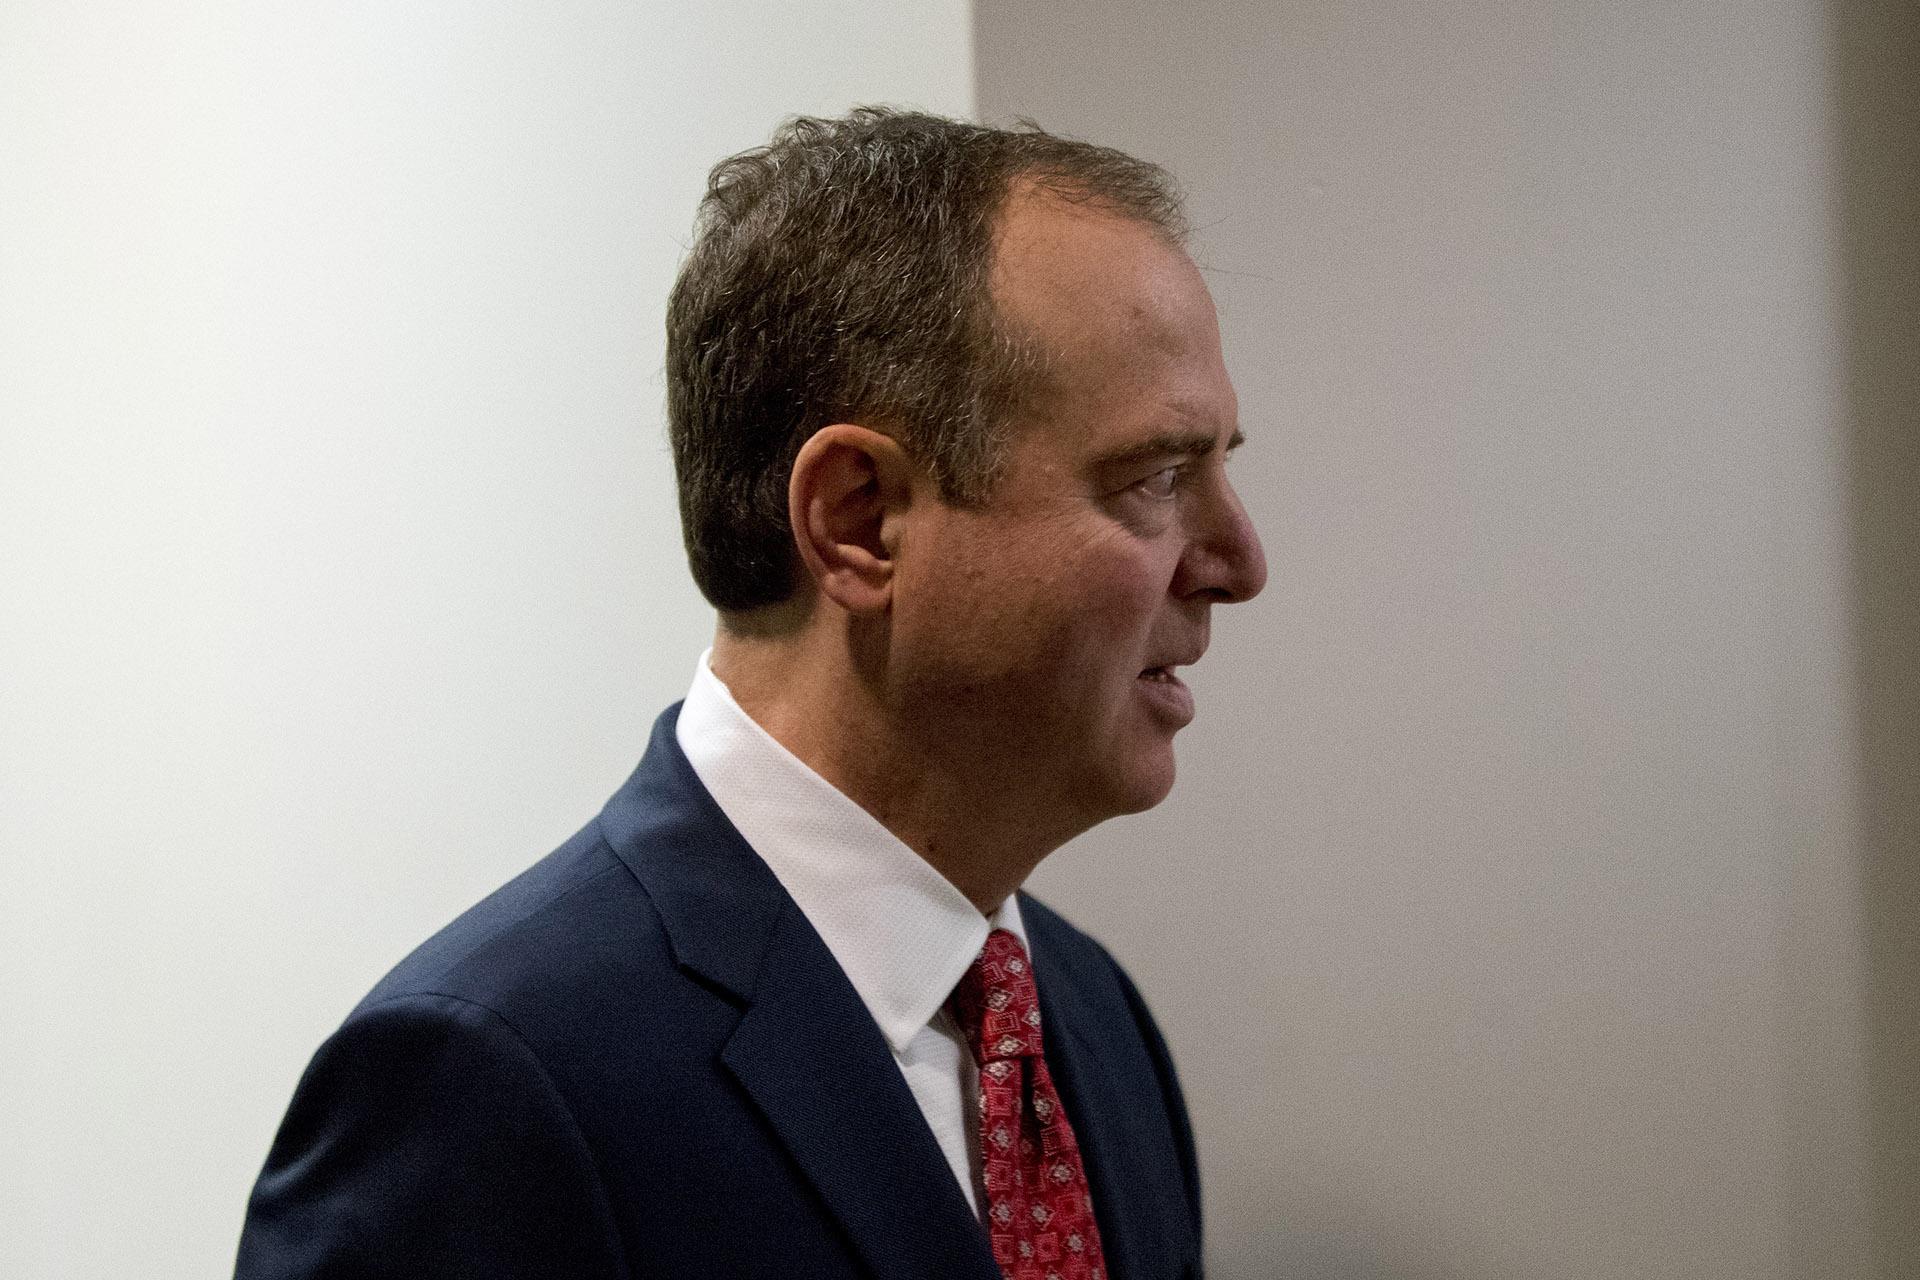 Rep. Adam Schiff, D-Calif., Chairman of the House Intelligence Committee, arrives at a closed door meeting on the ongoing House impeachment inquiry into President Donald Trump on Capitol Hill in Washington, Tuesday, Nov. 5, 2019. (AP Photo / Andrew Harnik)